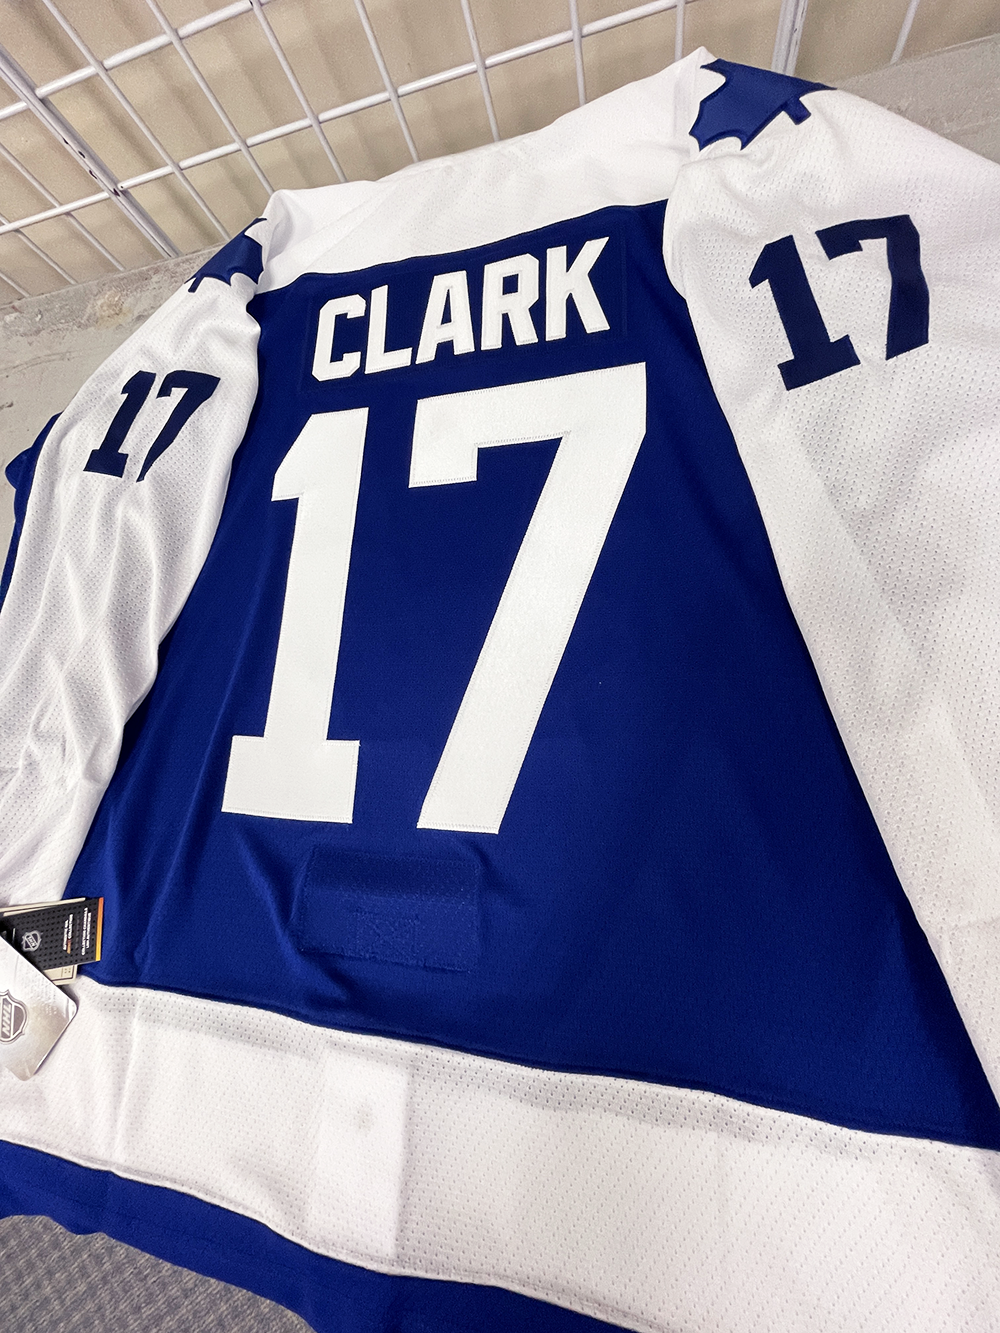 WENDEL CLARK TORONTO MAPLE LEAFS CCM AUTHENTIC ON-ICE GAME NHL HOCKEY  JERSEY.